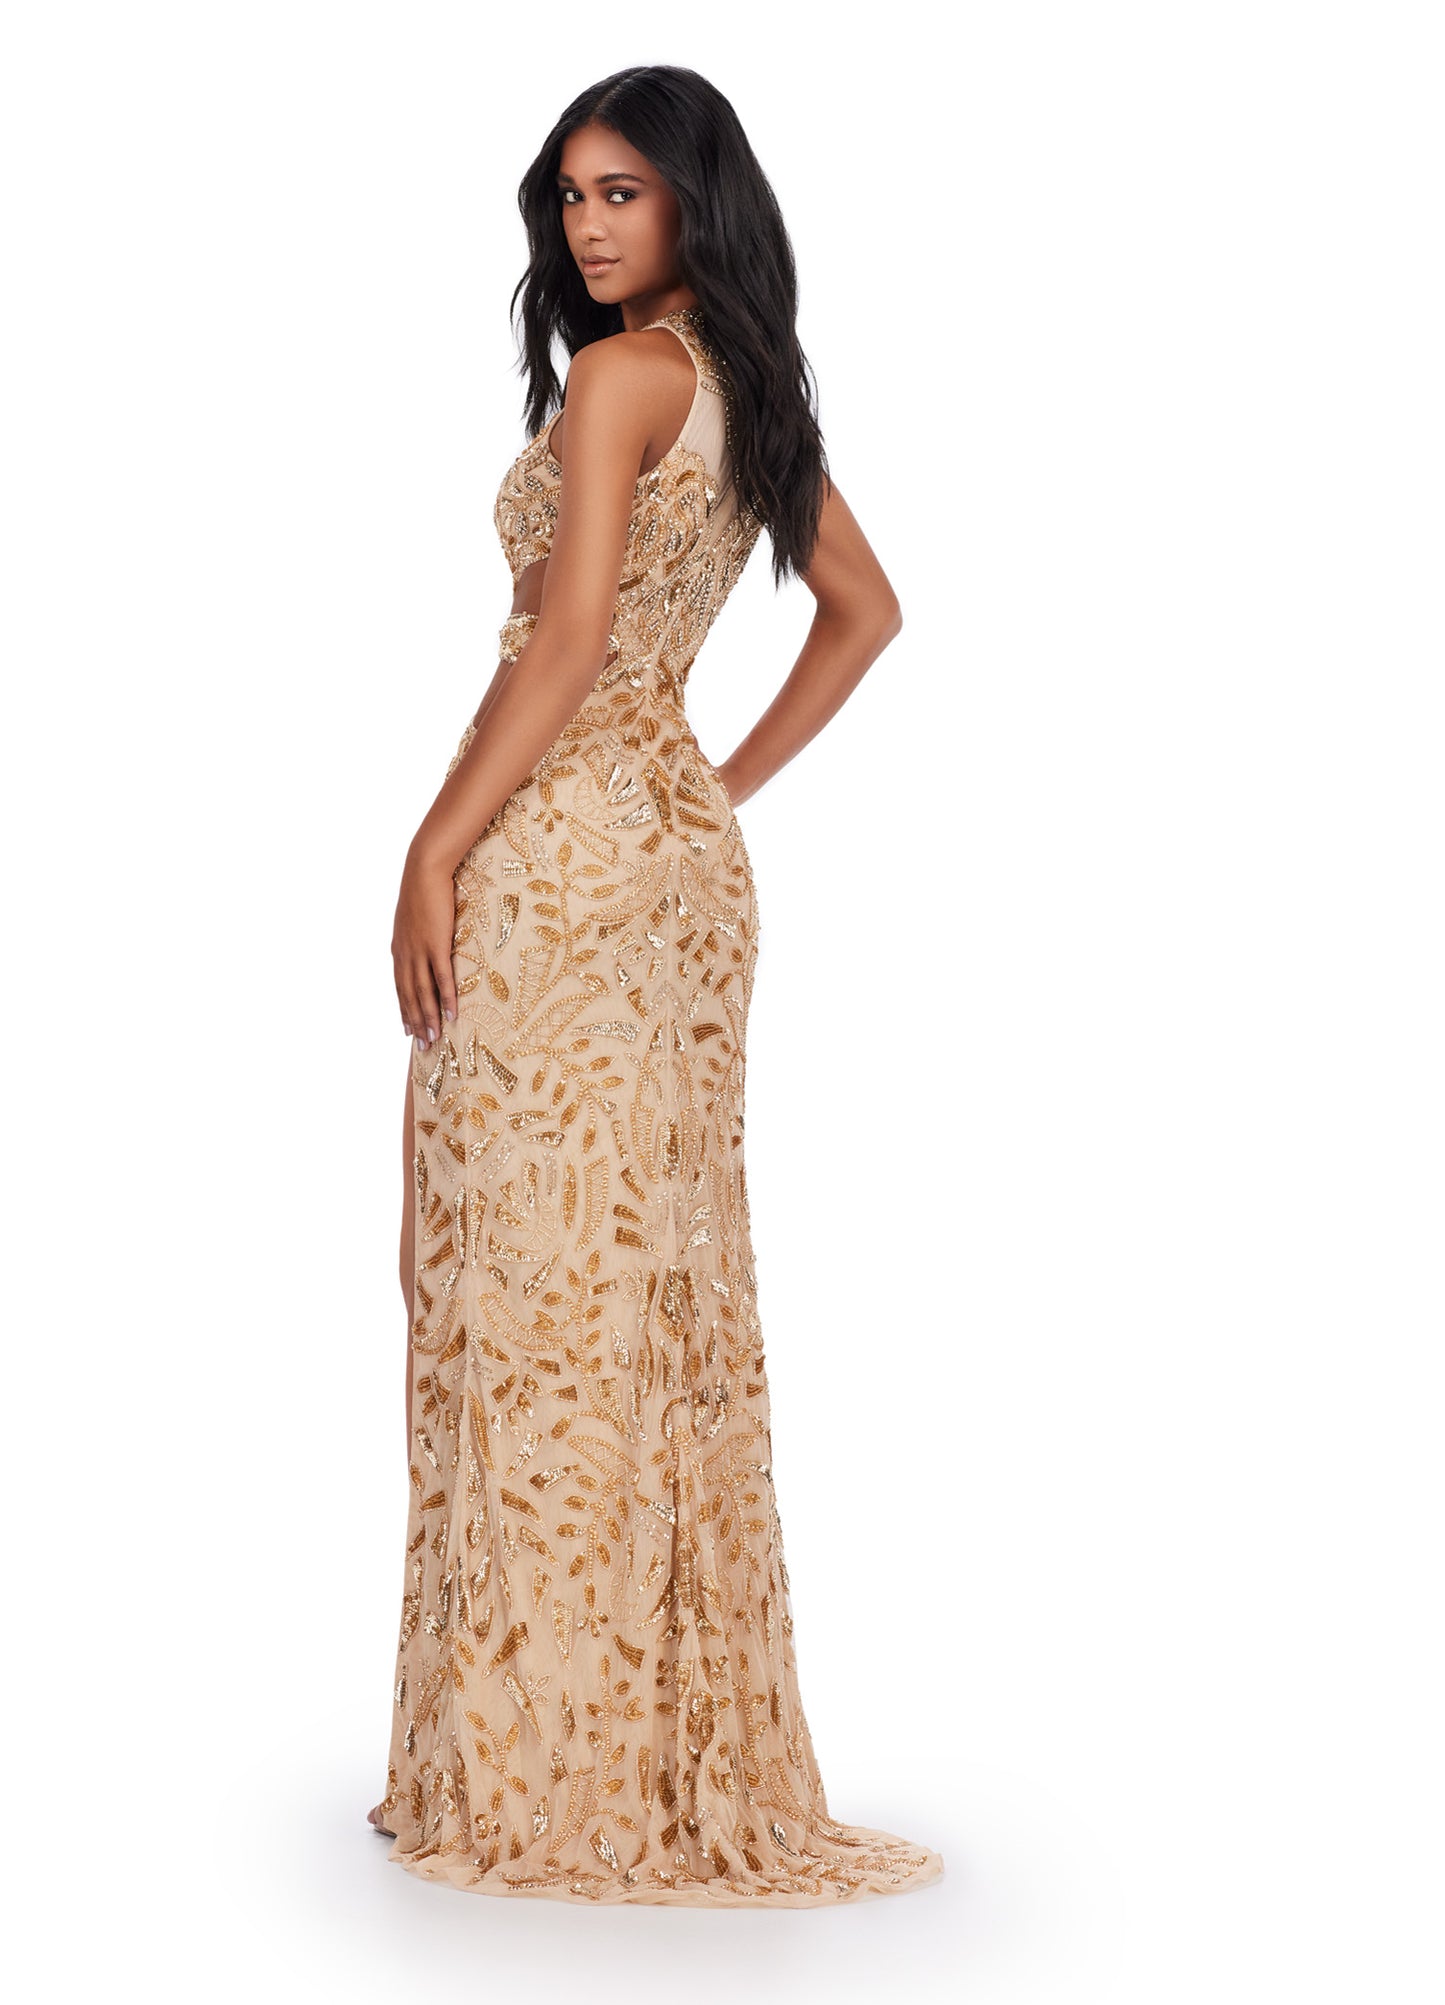 Ashley Lauren 11501 Long Prom Dress Fitted High Neck Cut Outs Intricate Bead Pattern Formal Pageant Gown